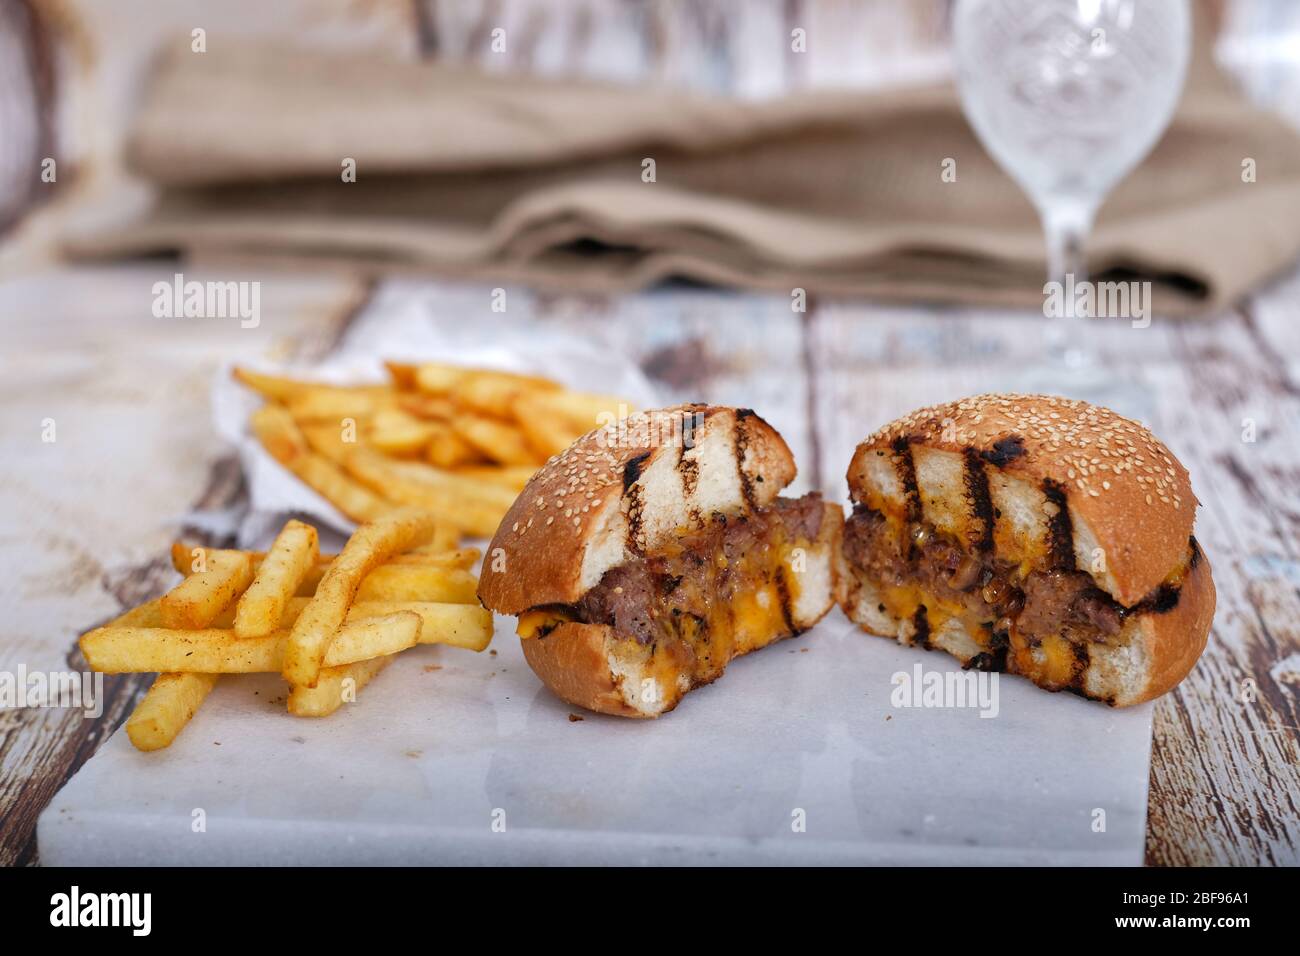 Fast Food, Hamburger. Special veal prepared hamburger, french fries and double cheddar cheese. Close-up fresh delicious tasty homemade burger. Stock Photo